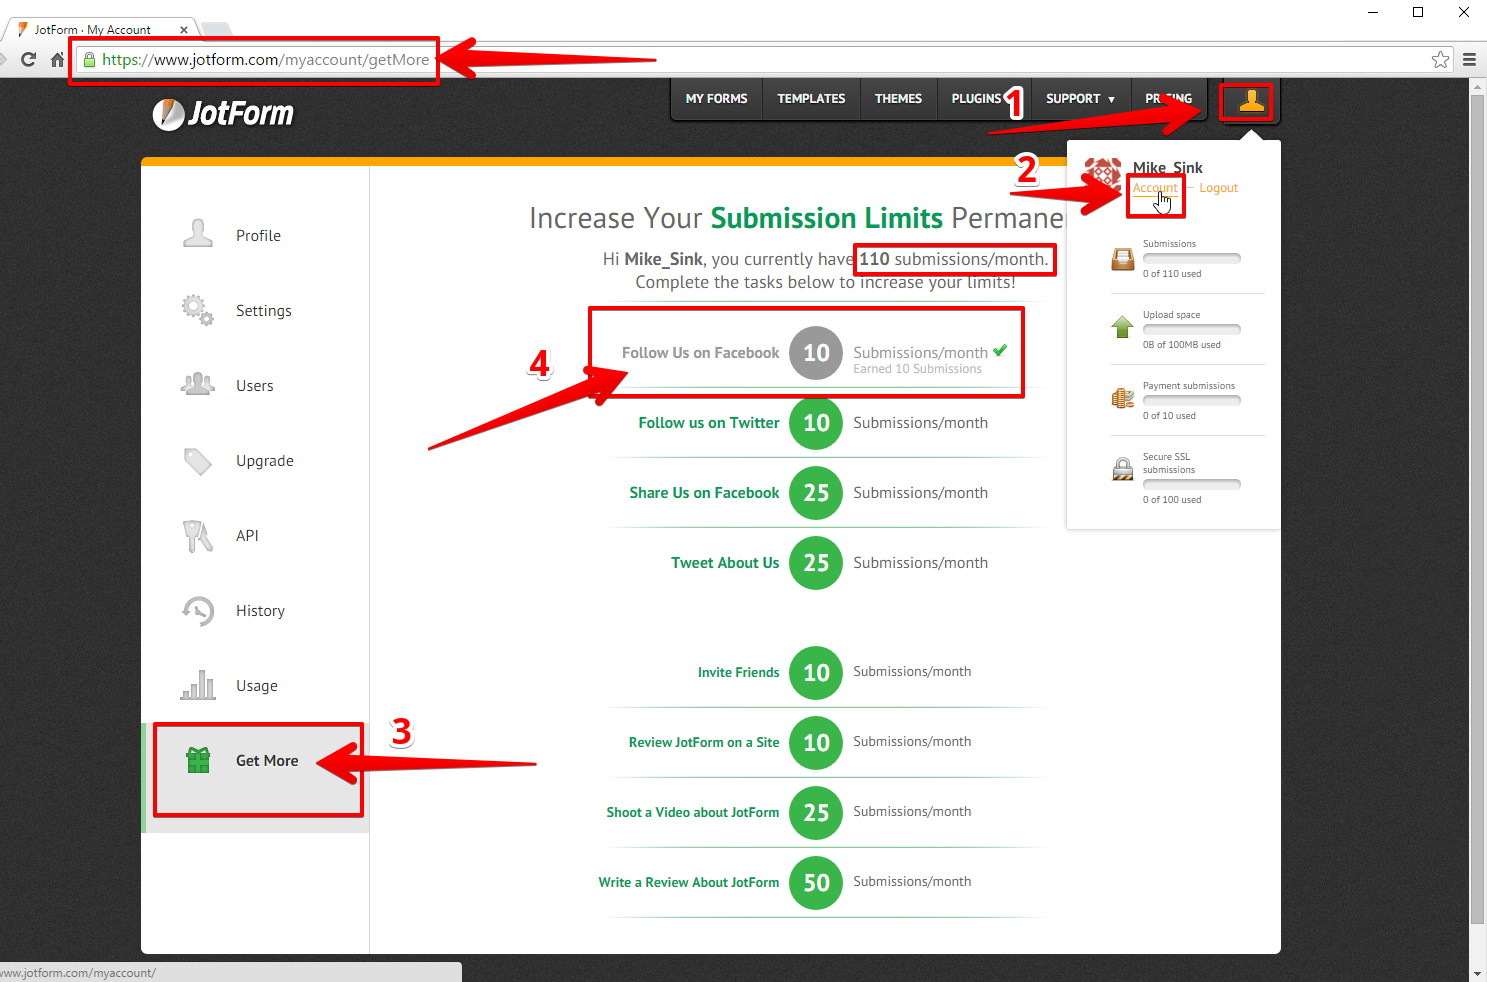 what is the charge for extra submissions when past the limit? Image 1 Screenshot 20